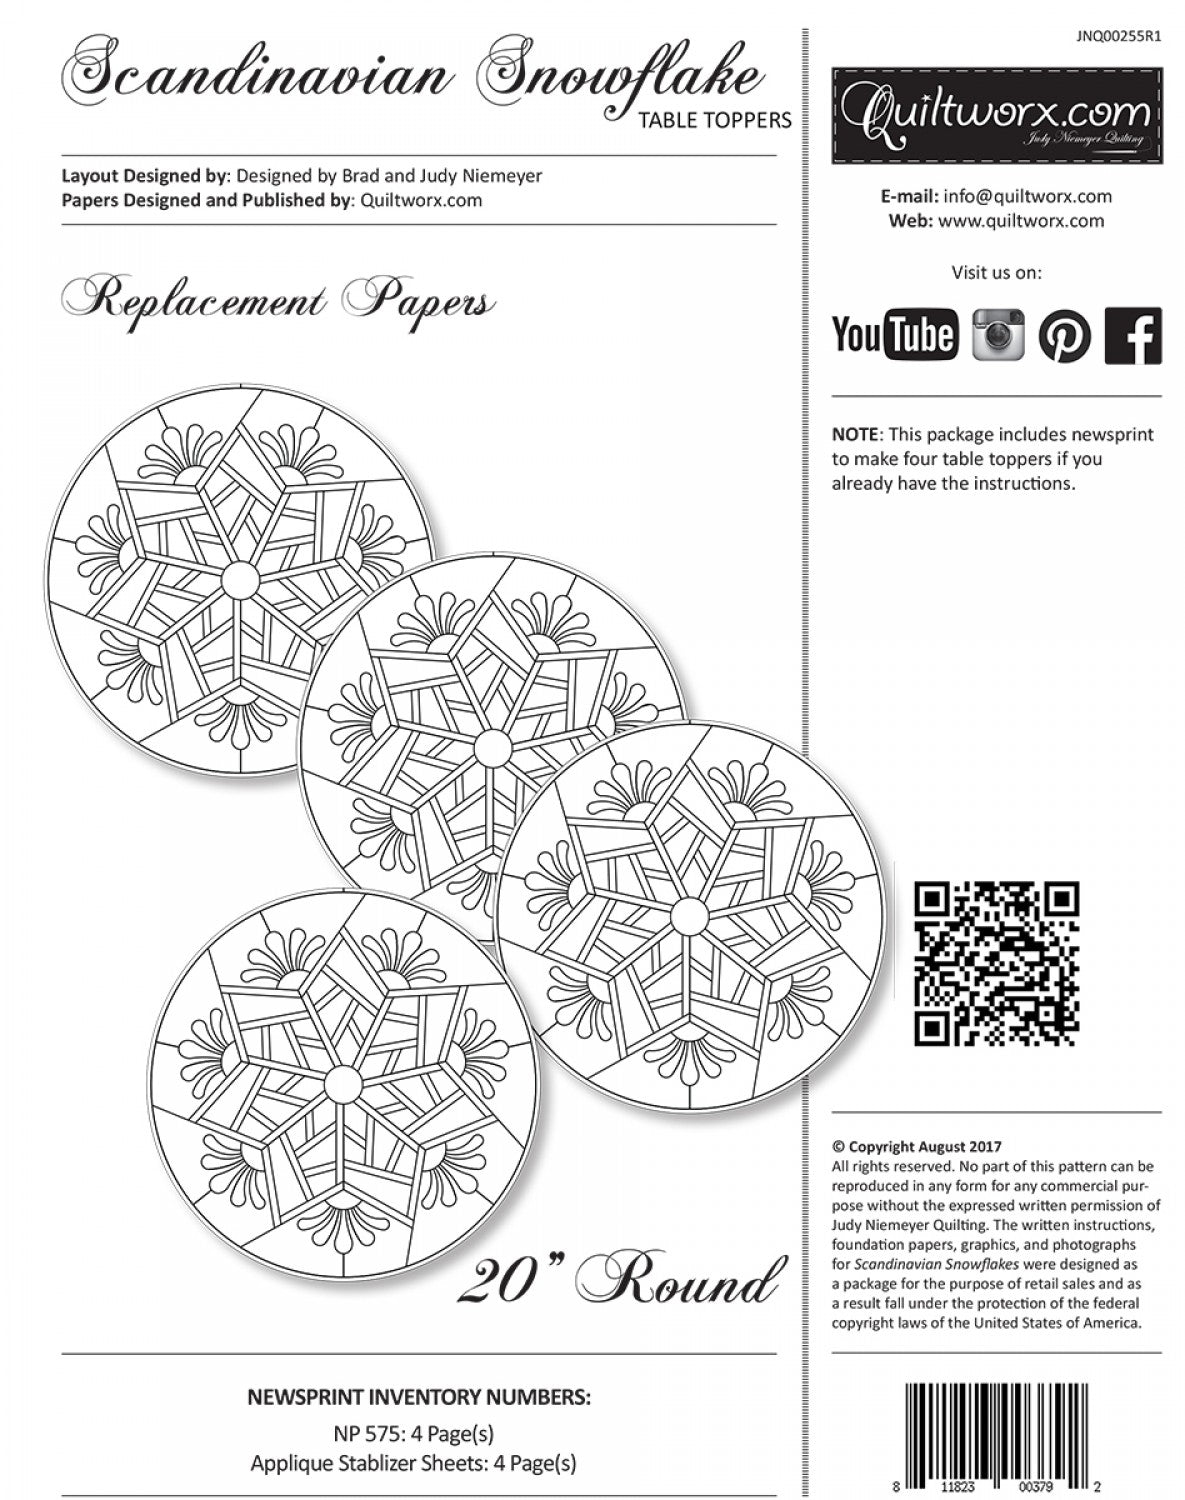 Scandinavian Snowflake Replacement Papers by Judy Niemeyer of Quiltworx